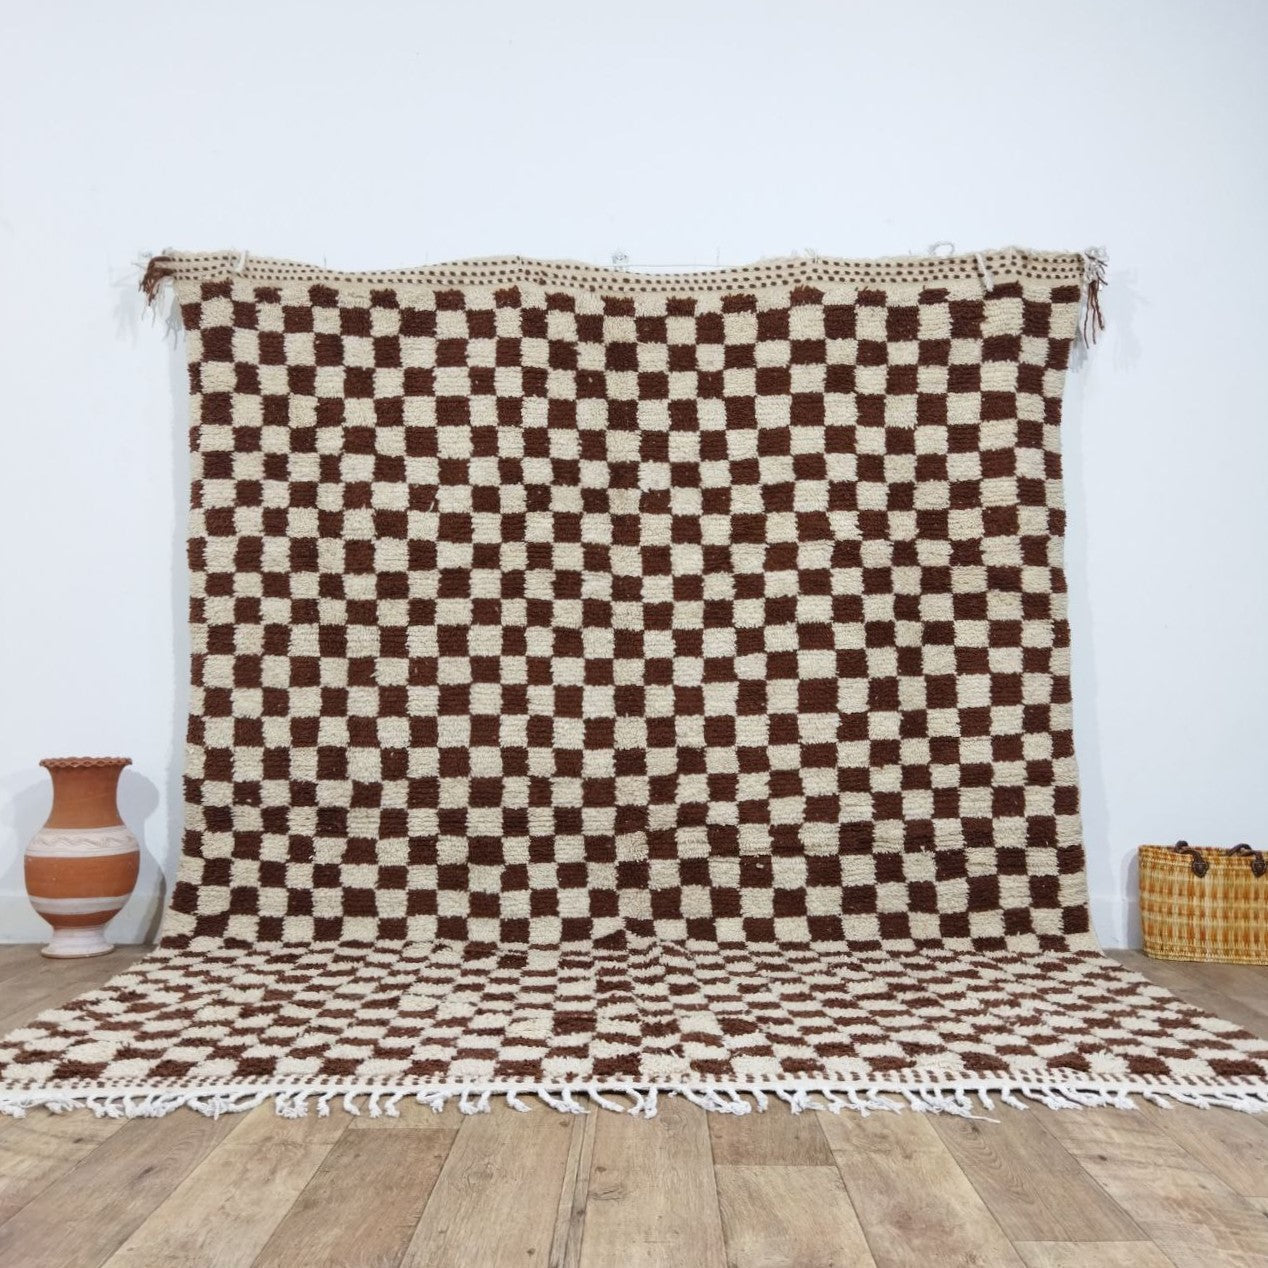 Brown Handmade Rug, White and Brown Checkered Rug - Berber style wool rug from Morocco - Modern rug